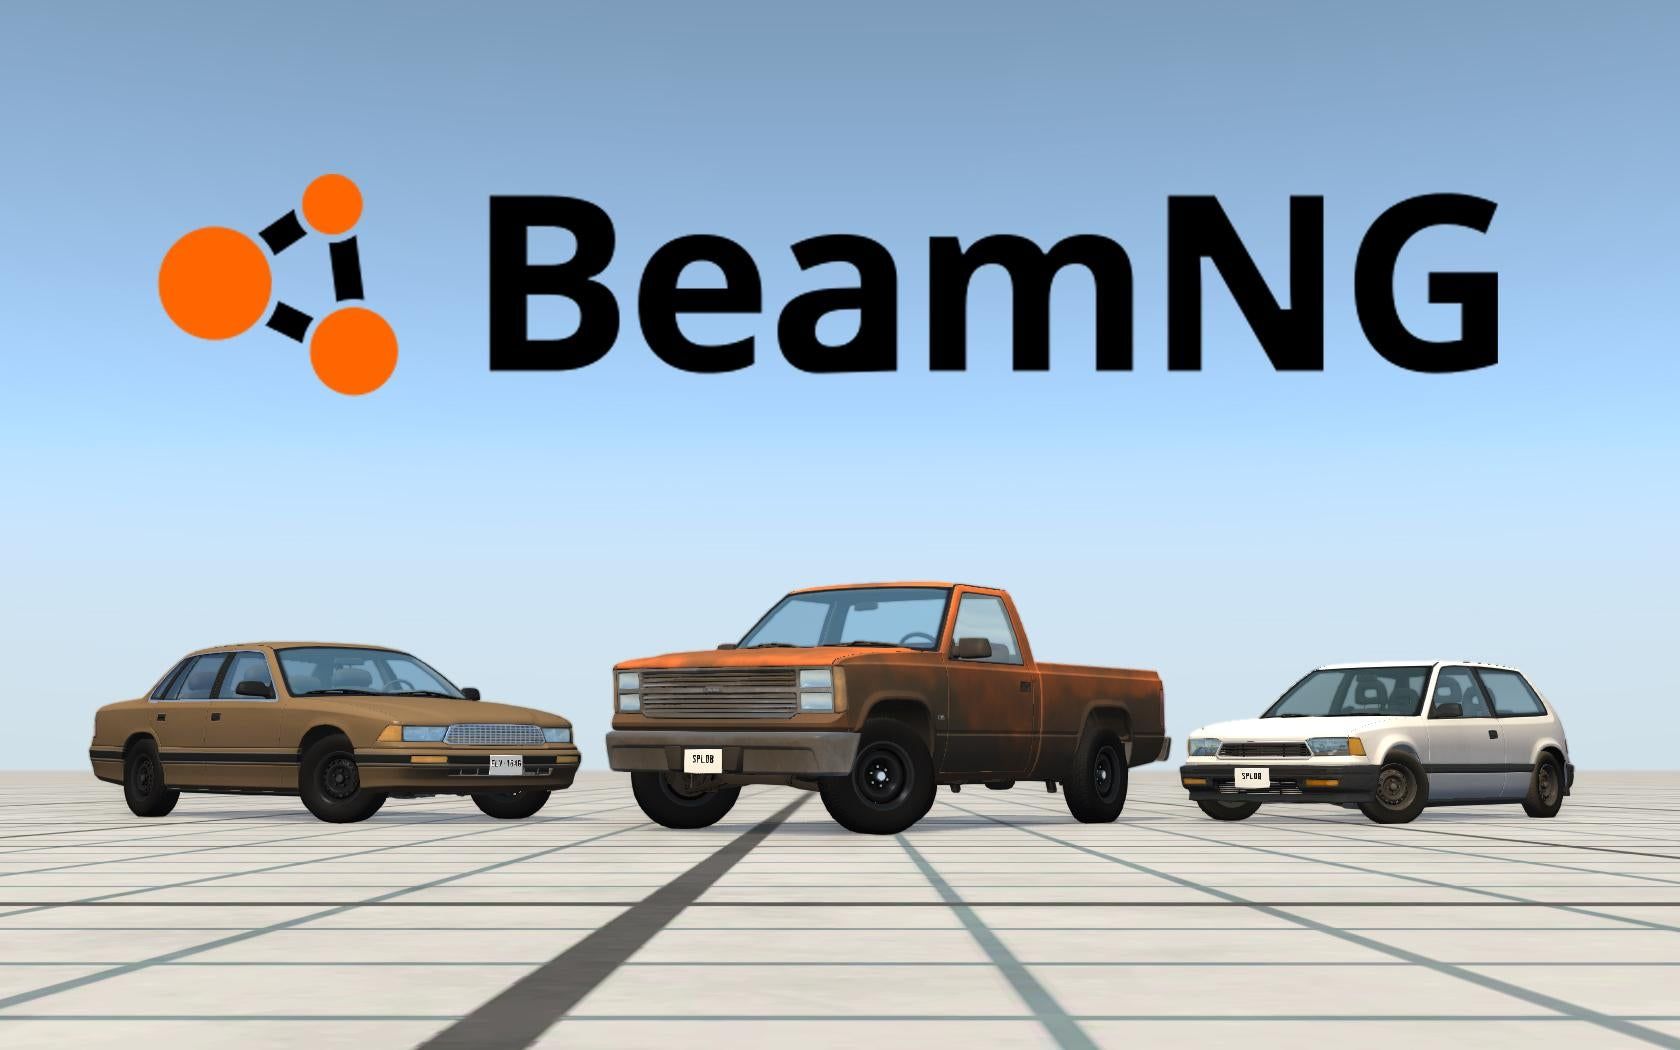 beamng drive logo on trasnparent backround